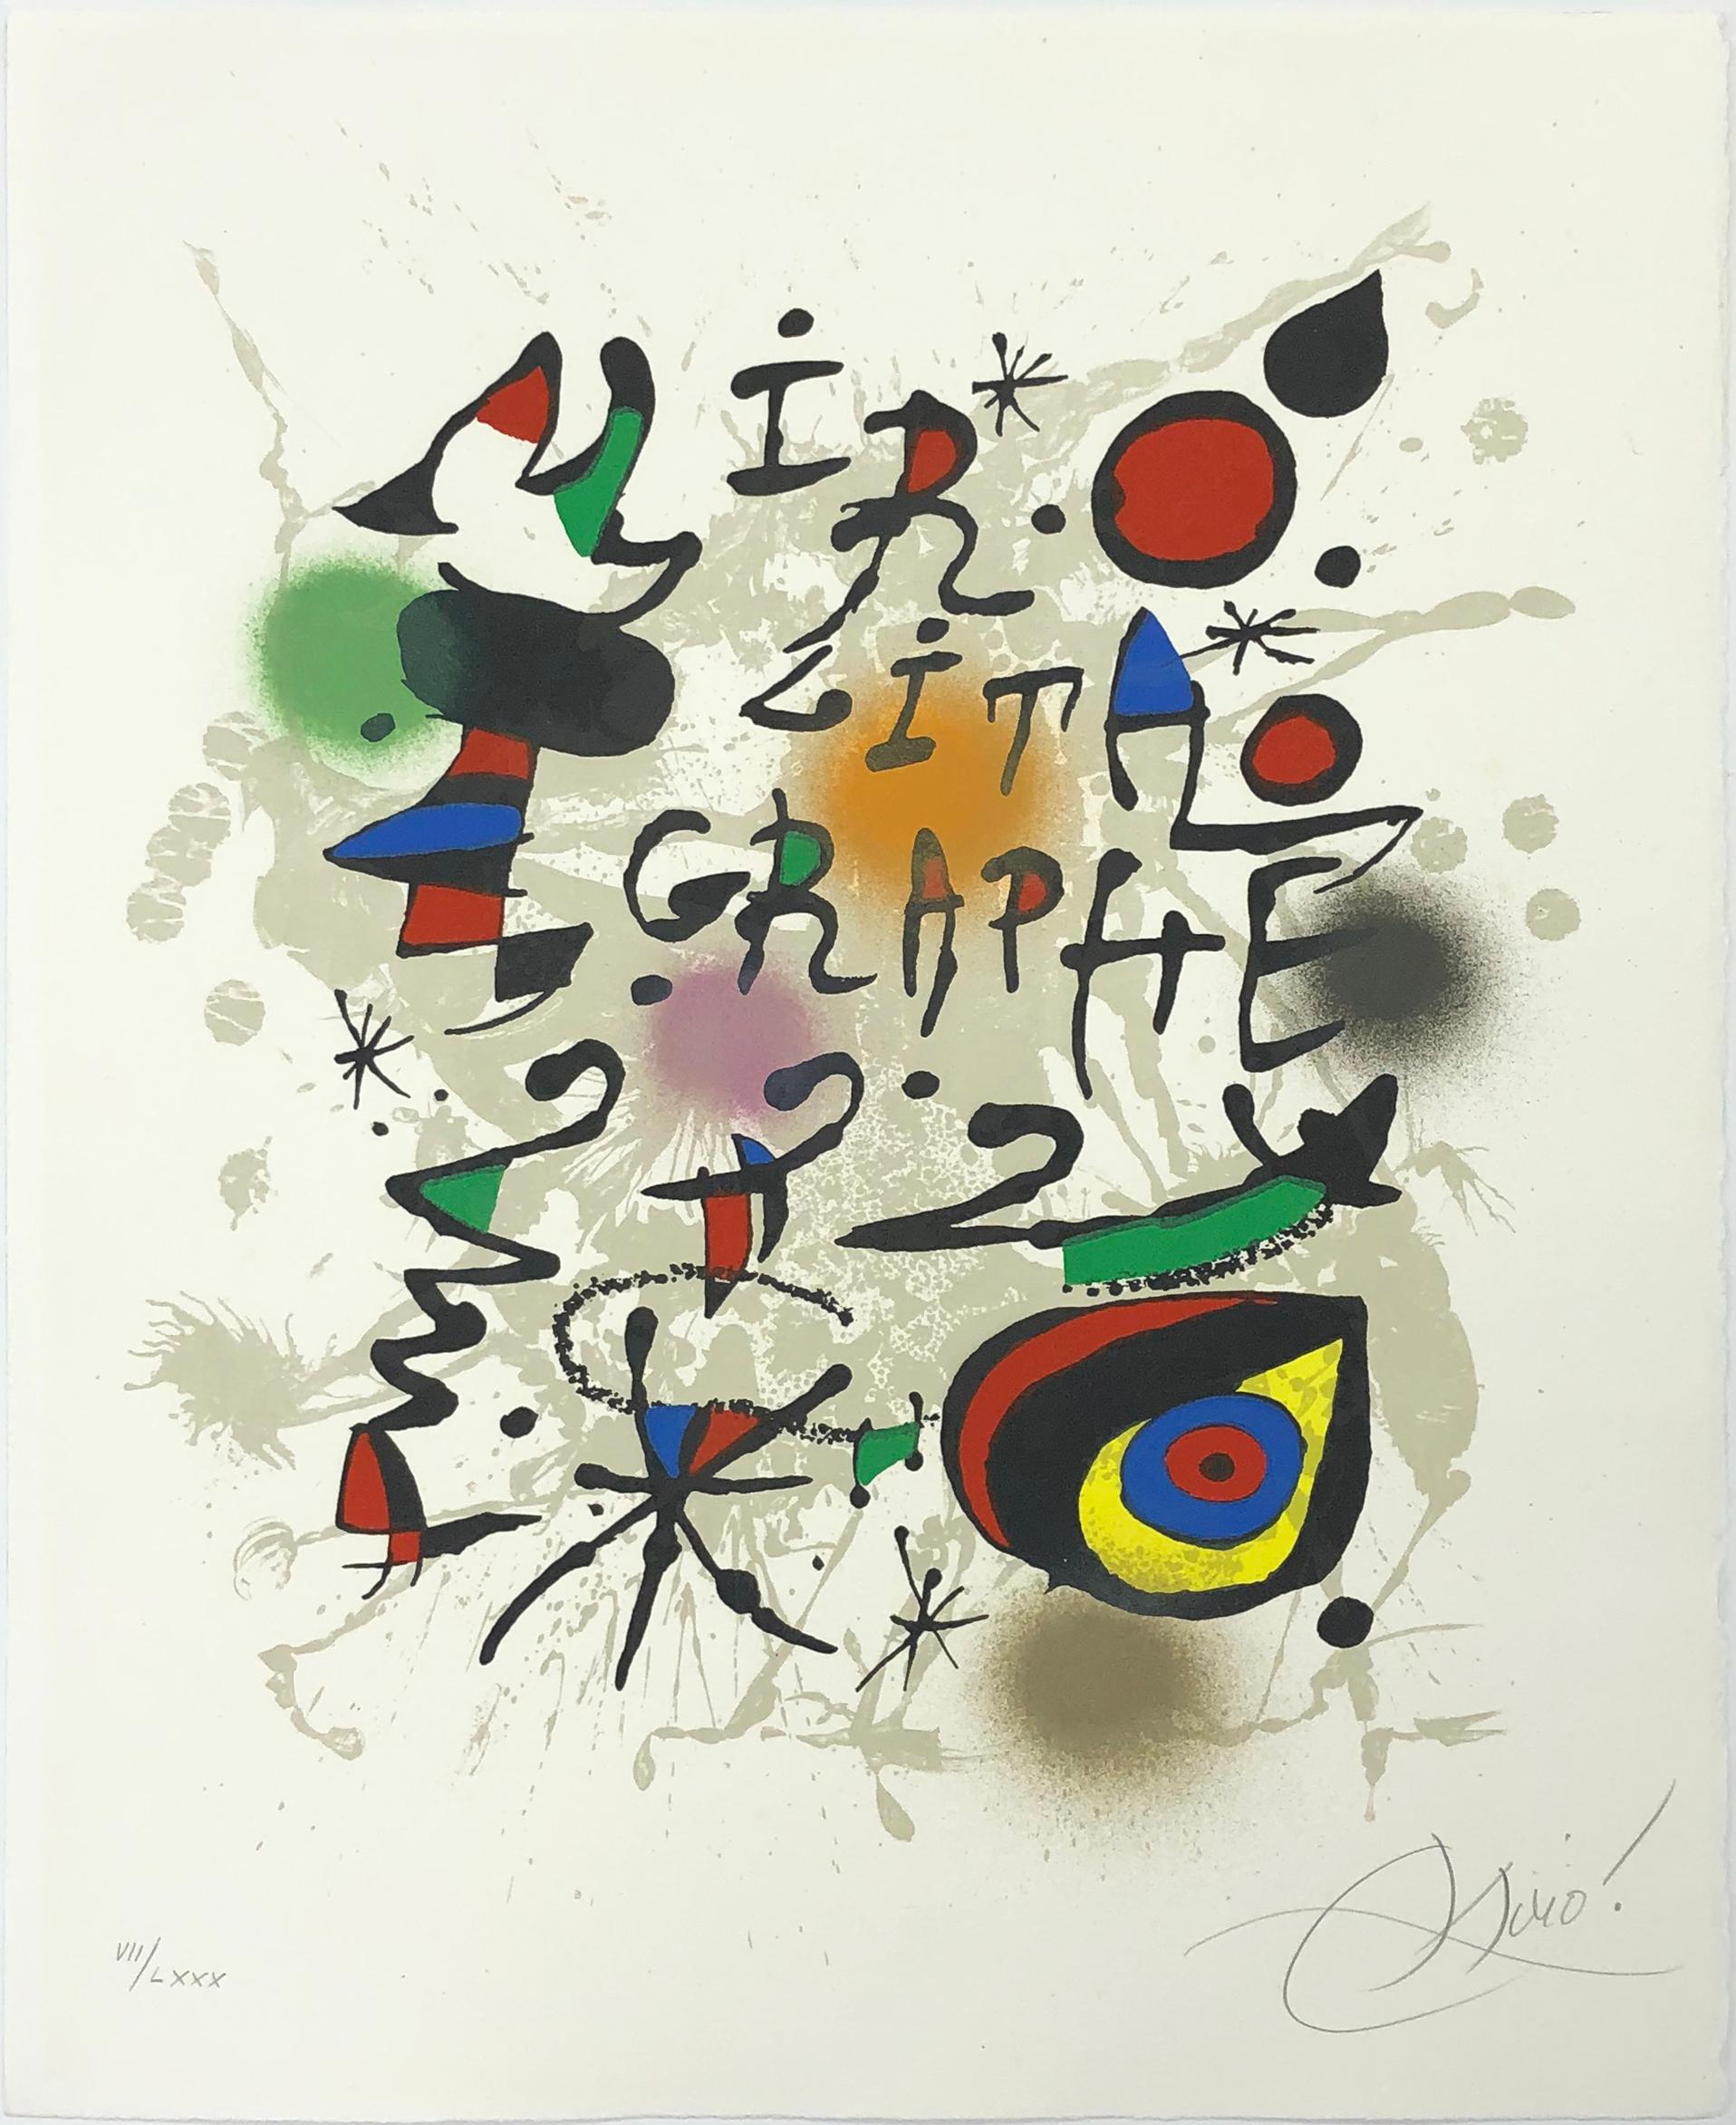 LITHOGRAPHE III (8 SIGNED PRINTS) - Print by Joan Miró